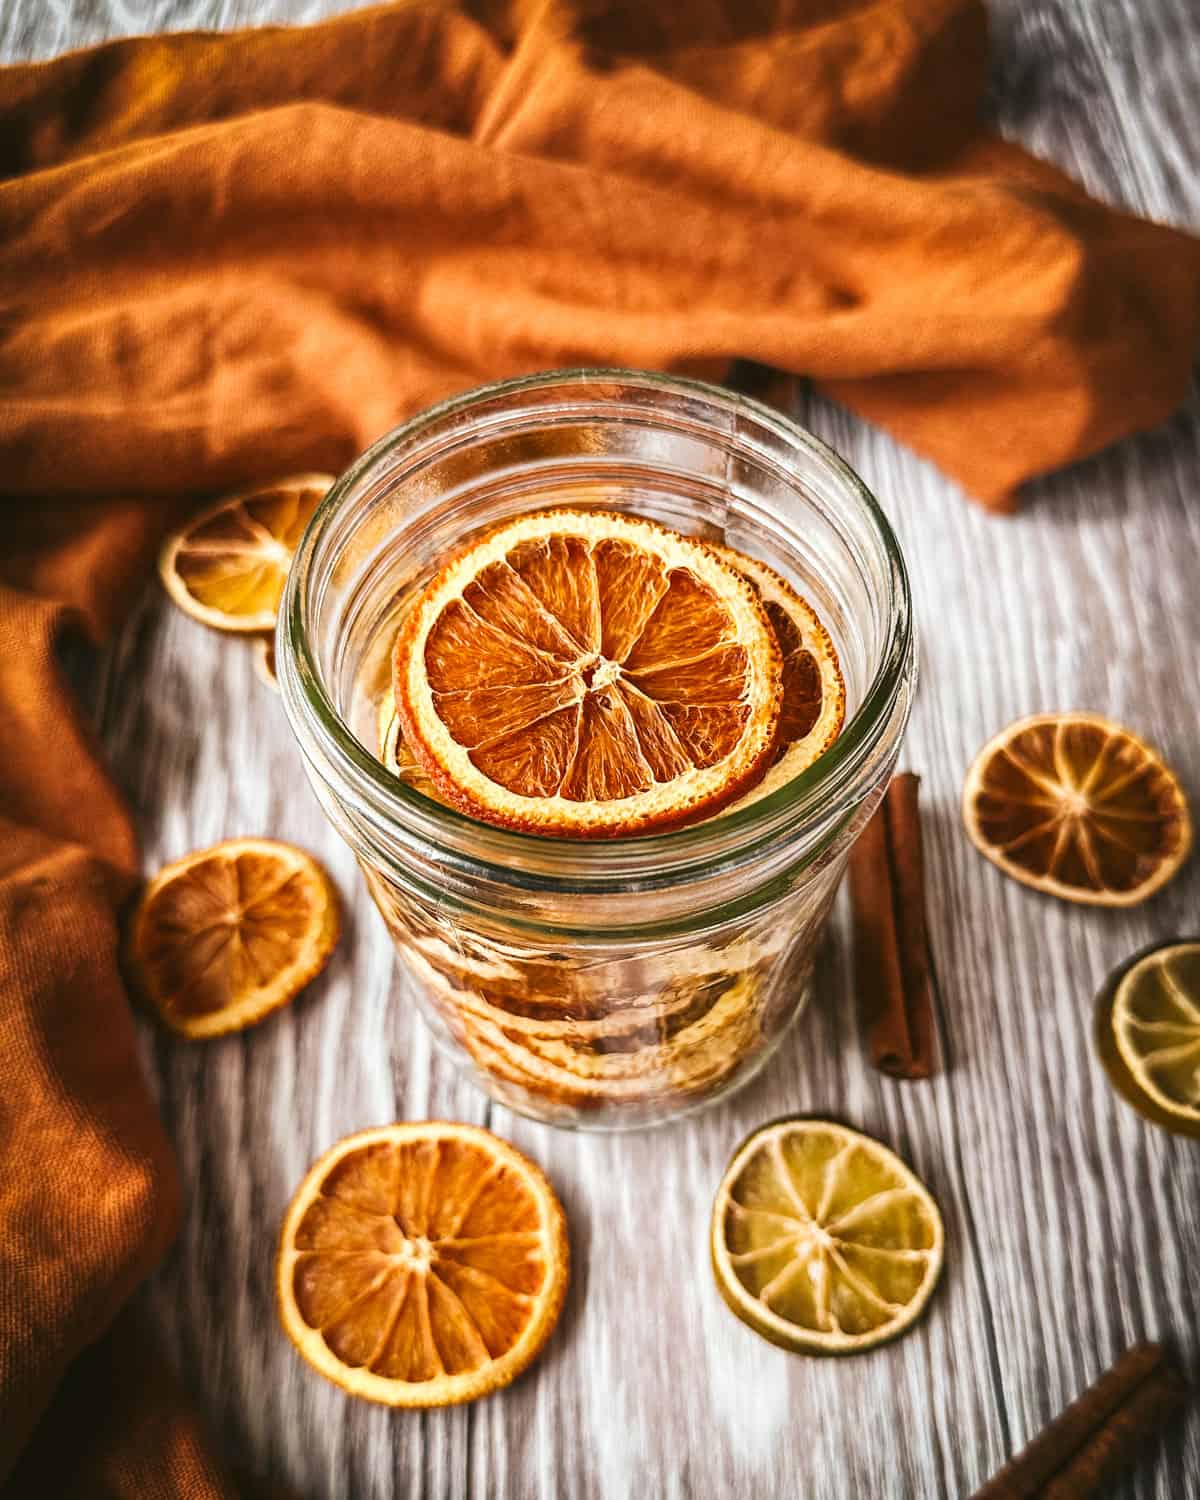 Dried citrus slices in a jar on a light wood surface, surrounded by dried citrus slices and an orange cloth.